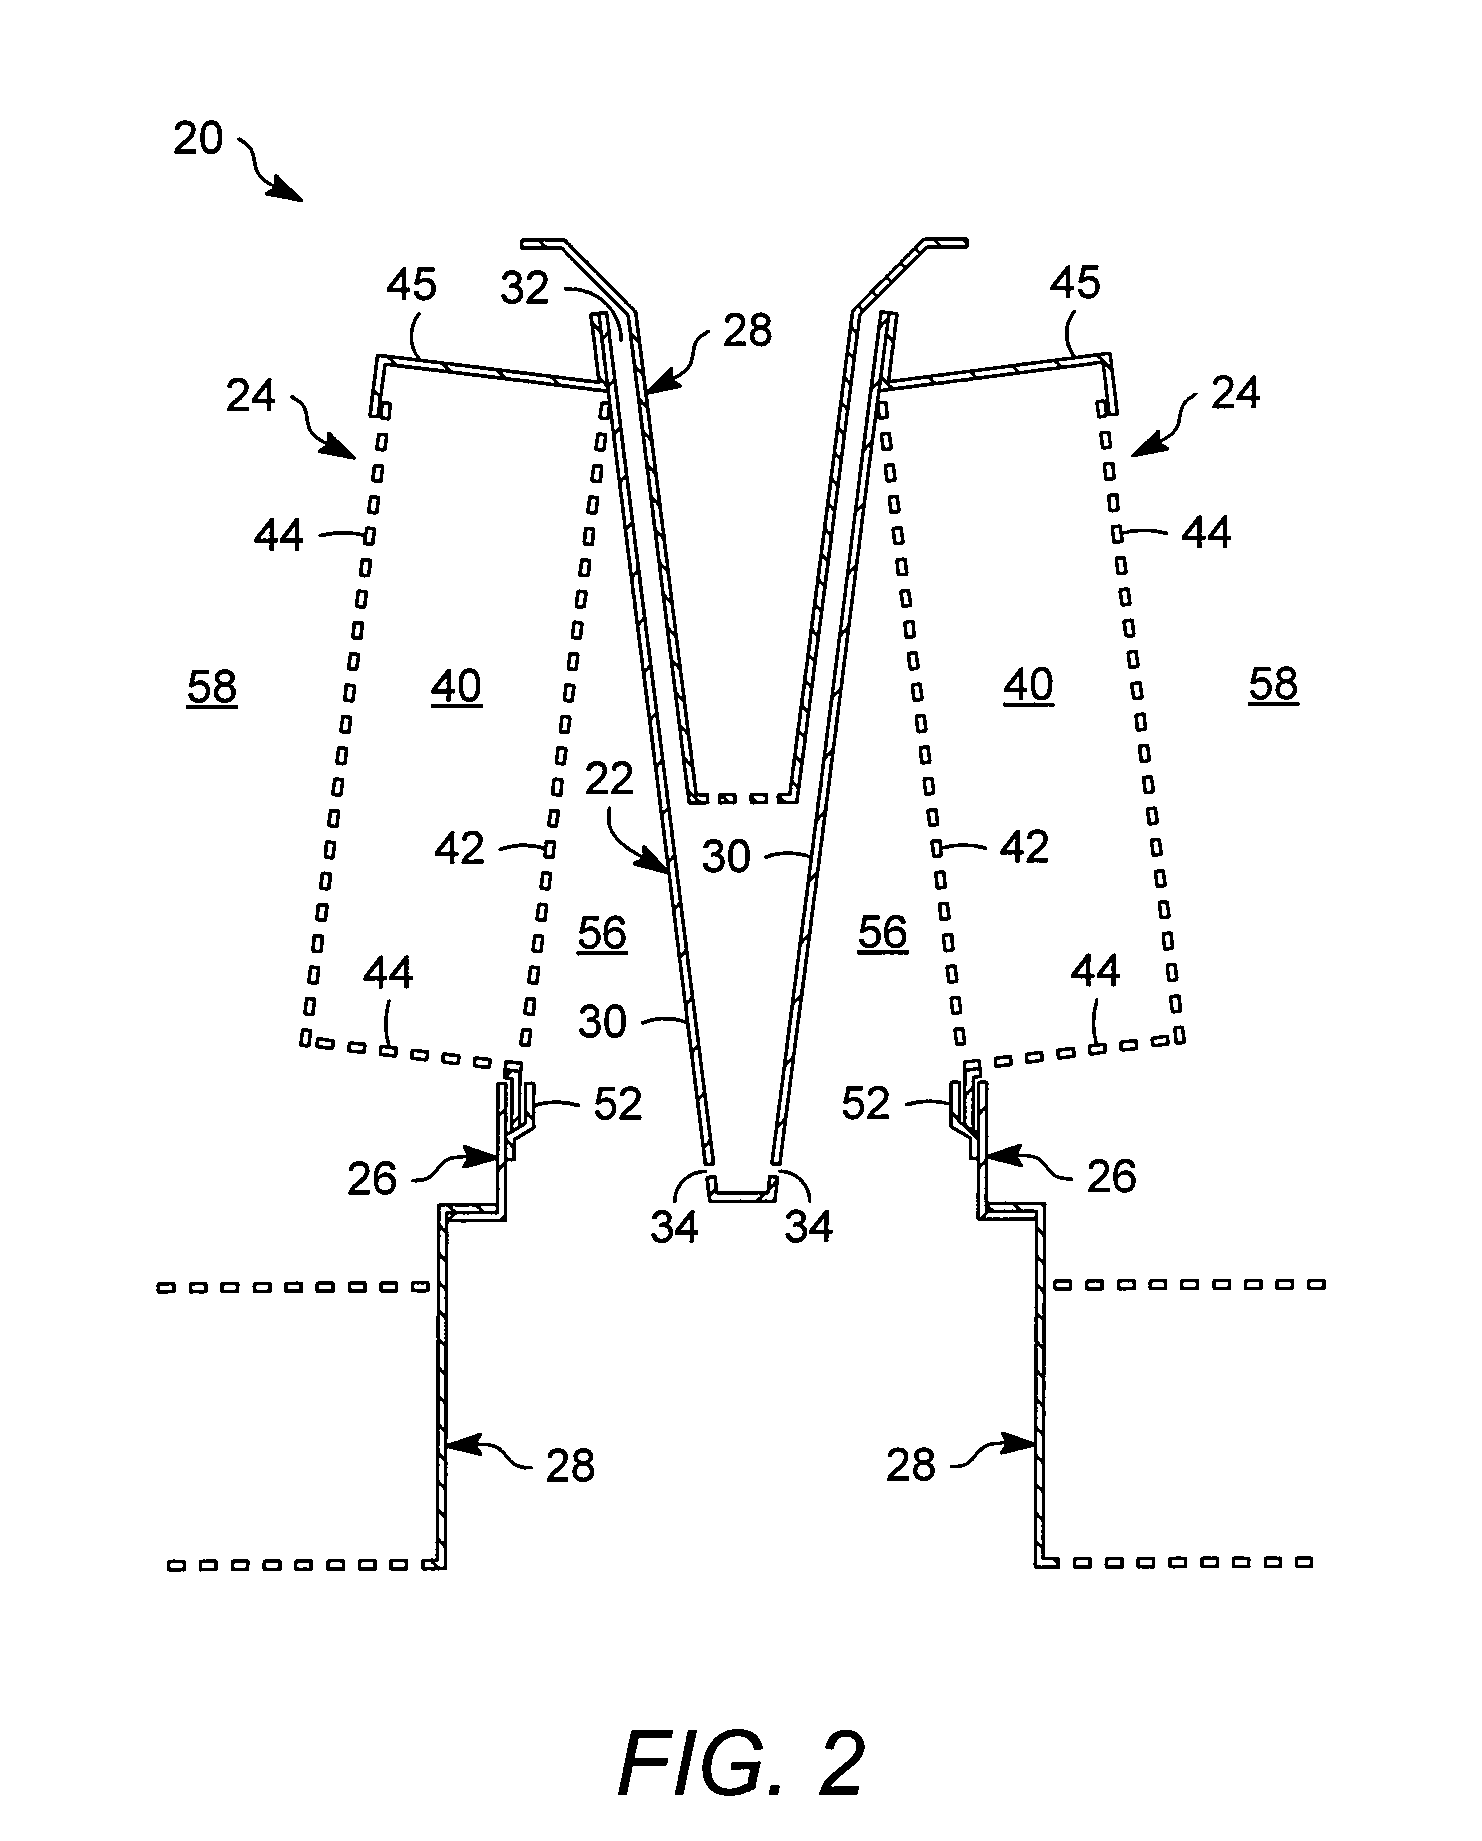 Vapor-liquid contacting in co-current contacting apparatuses